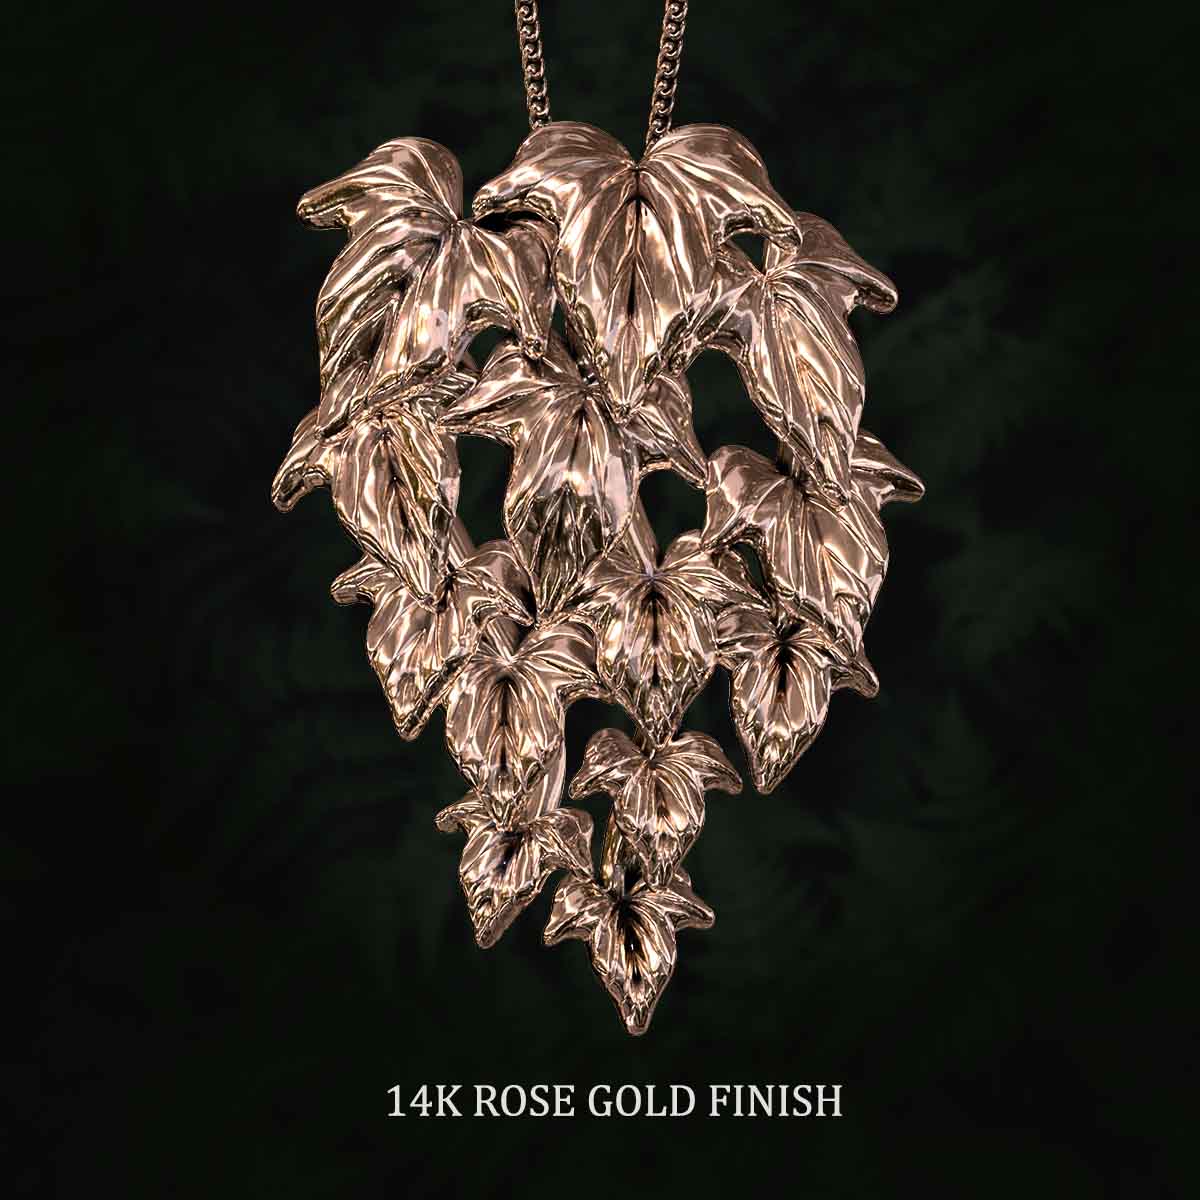     14k-Rose-Gold-Finish-Flowing-Vine-Medium-Pendant-Jewelry-For-Necklace